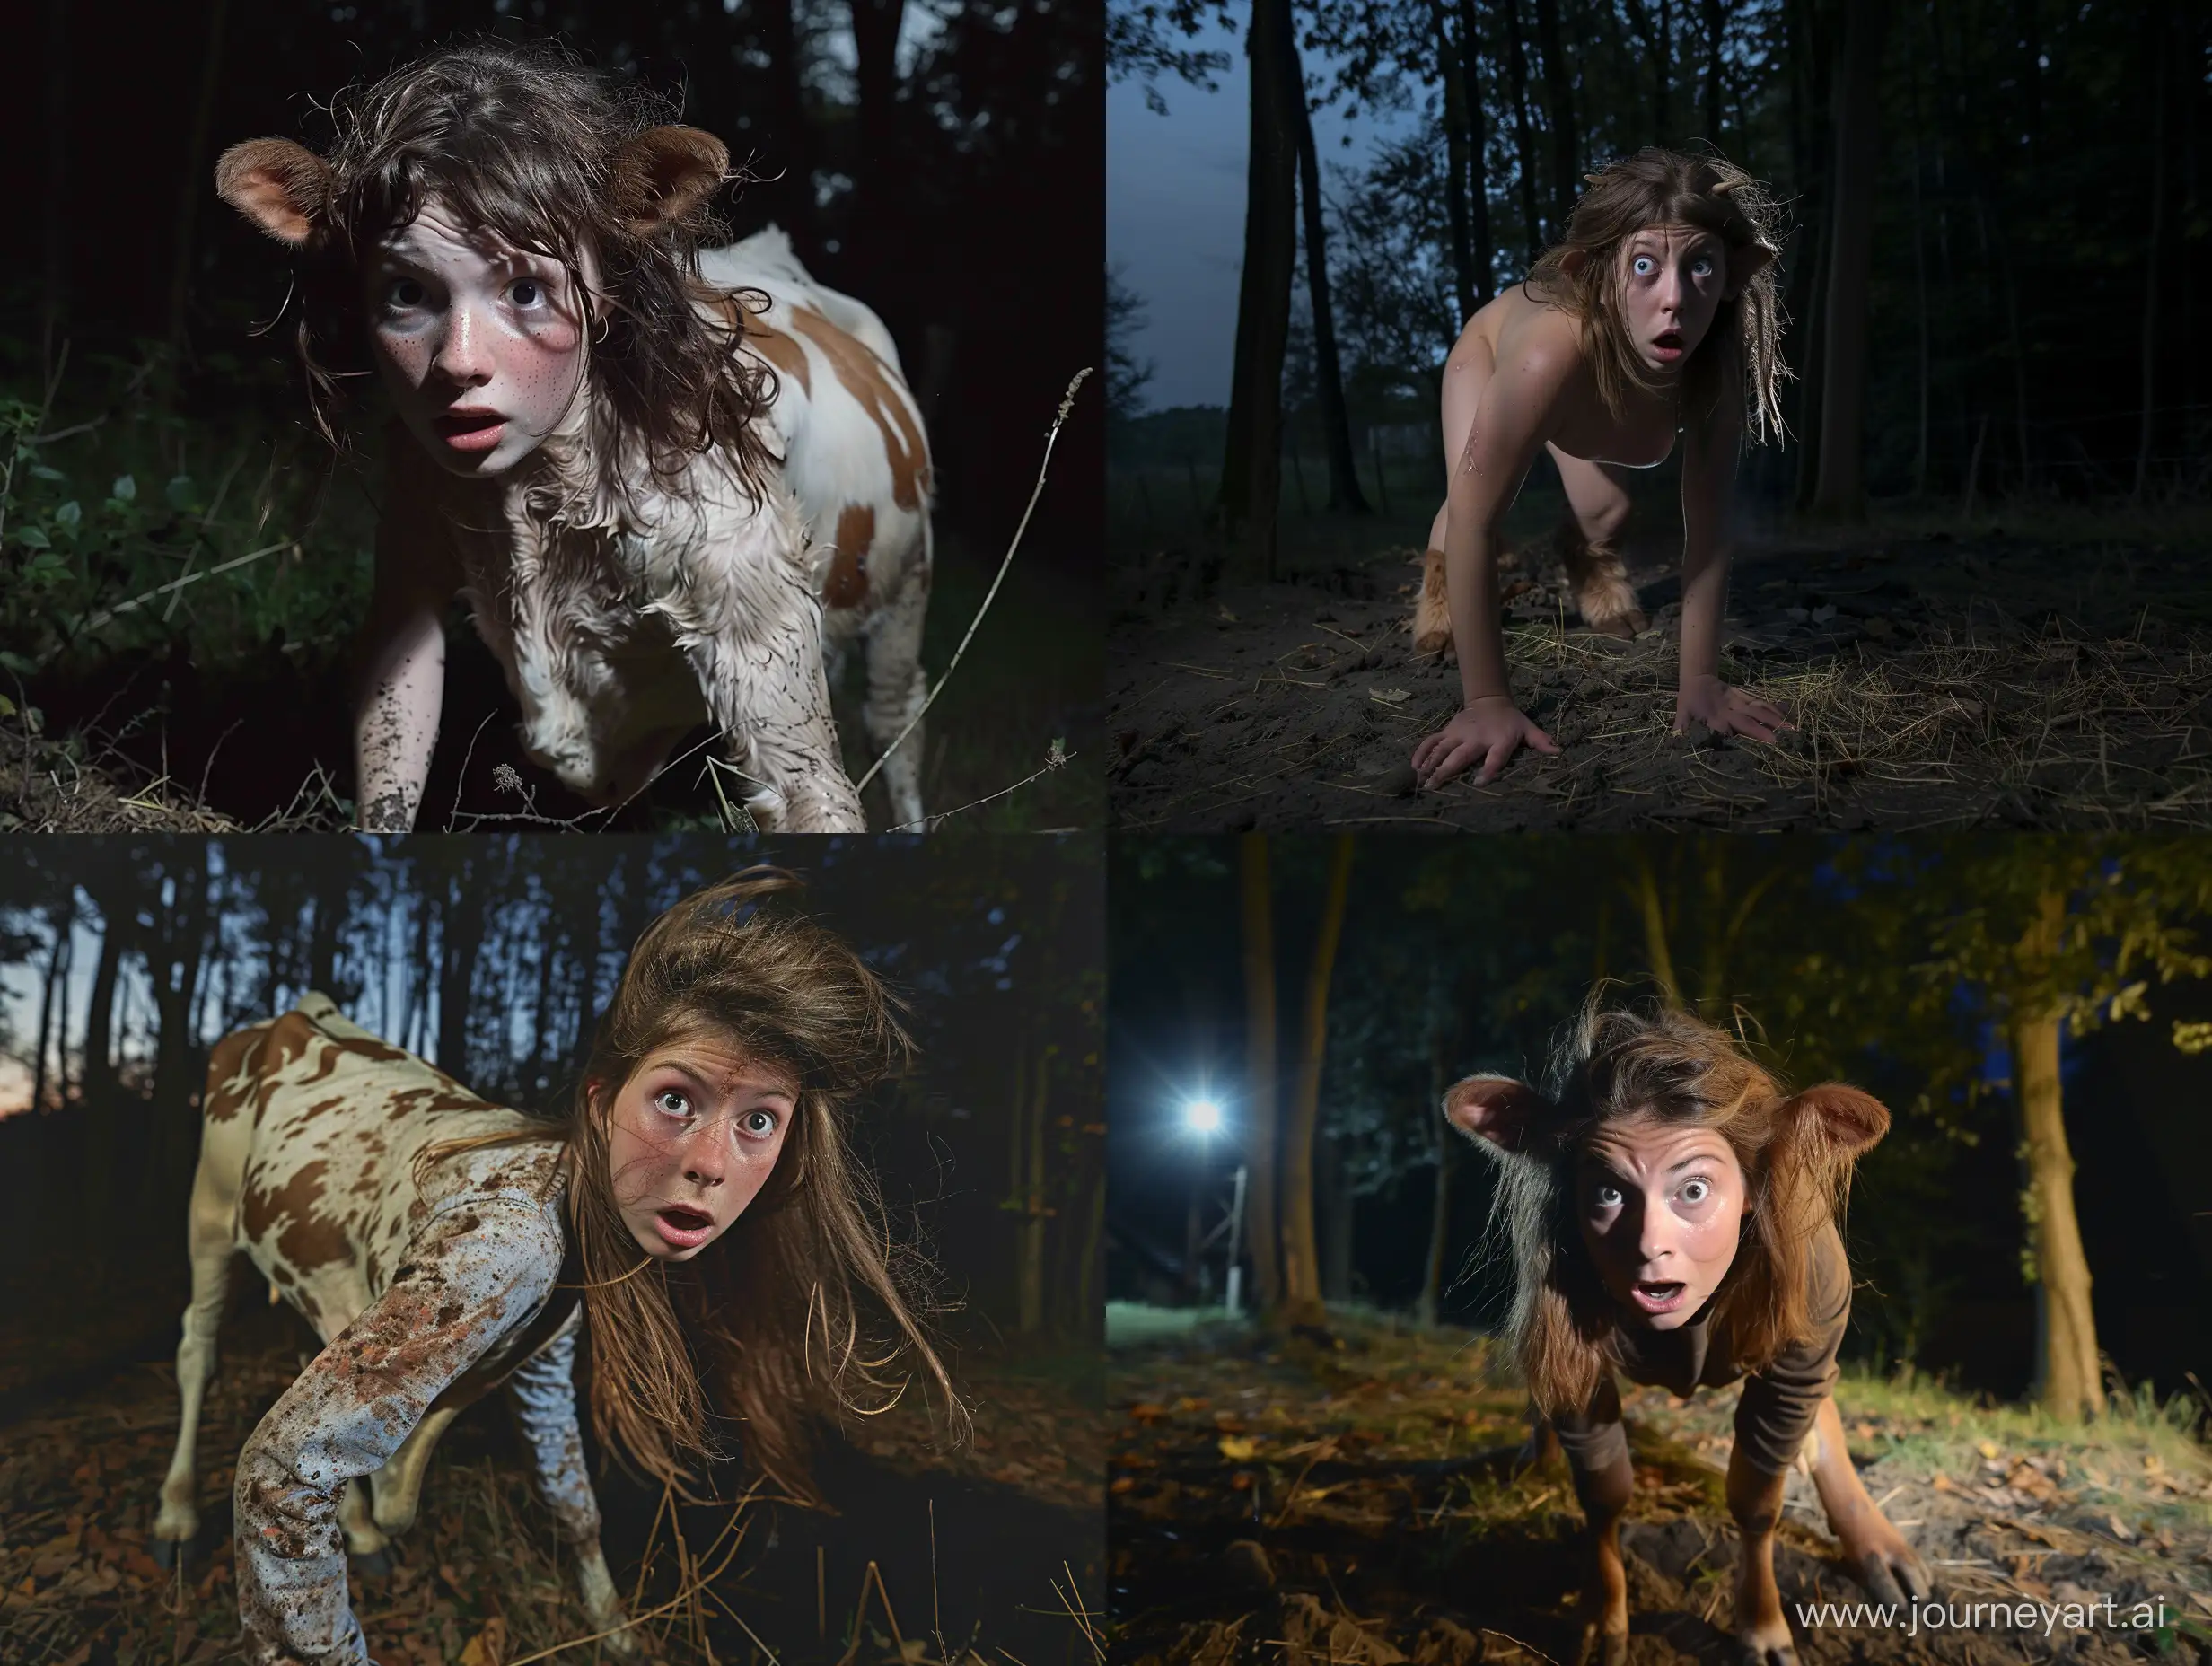 Startling-Transformation-Fearful-Young-Woman-Becomes-a-Cow-in-Enchanted-Forest-at-Night